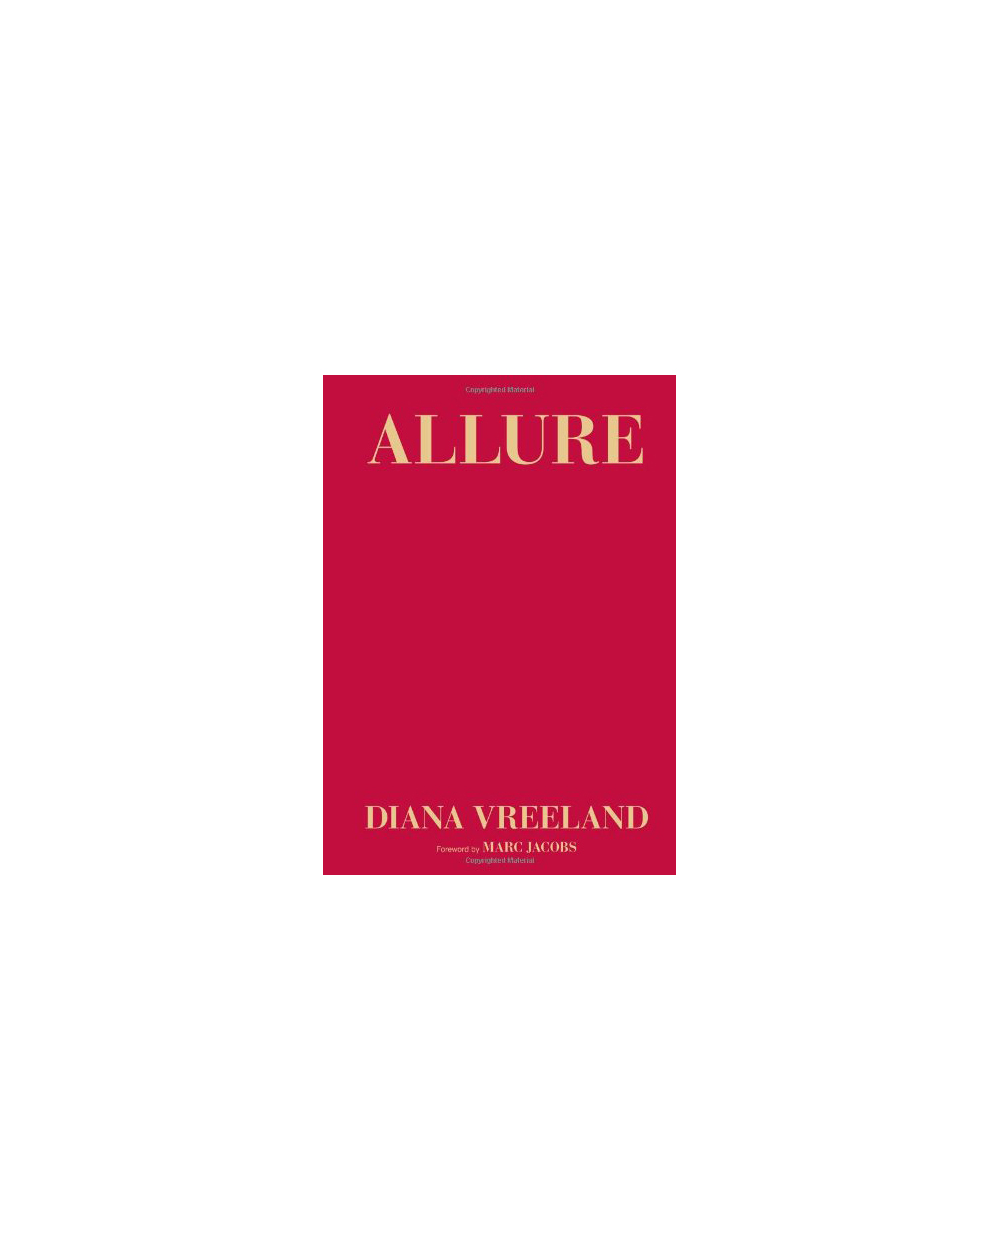 Allure by Diana Vreeland $53.95 from Whitcoulls